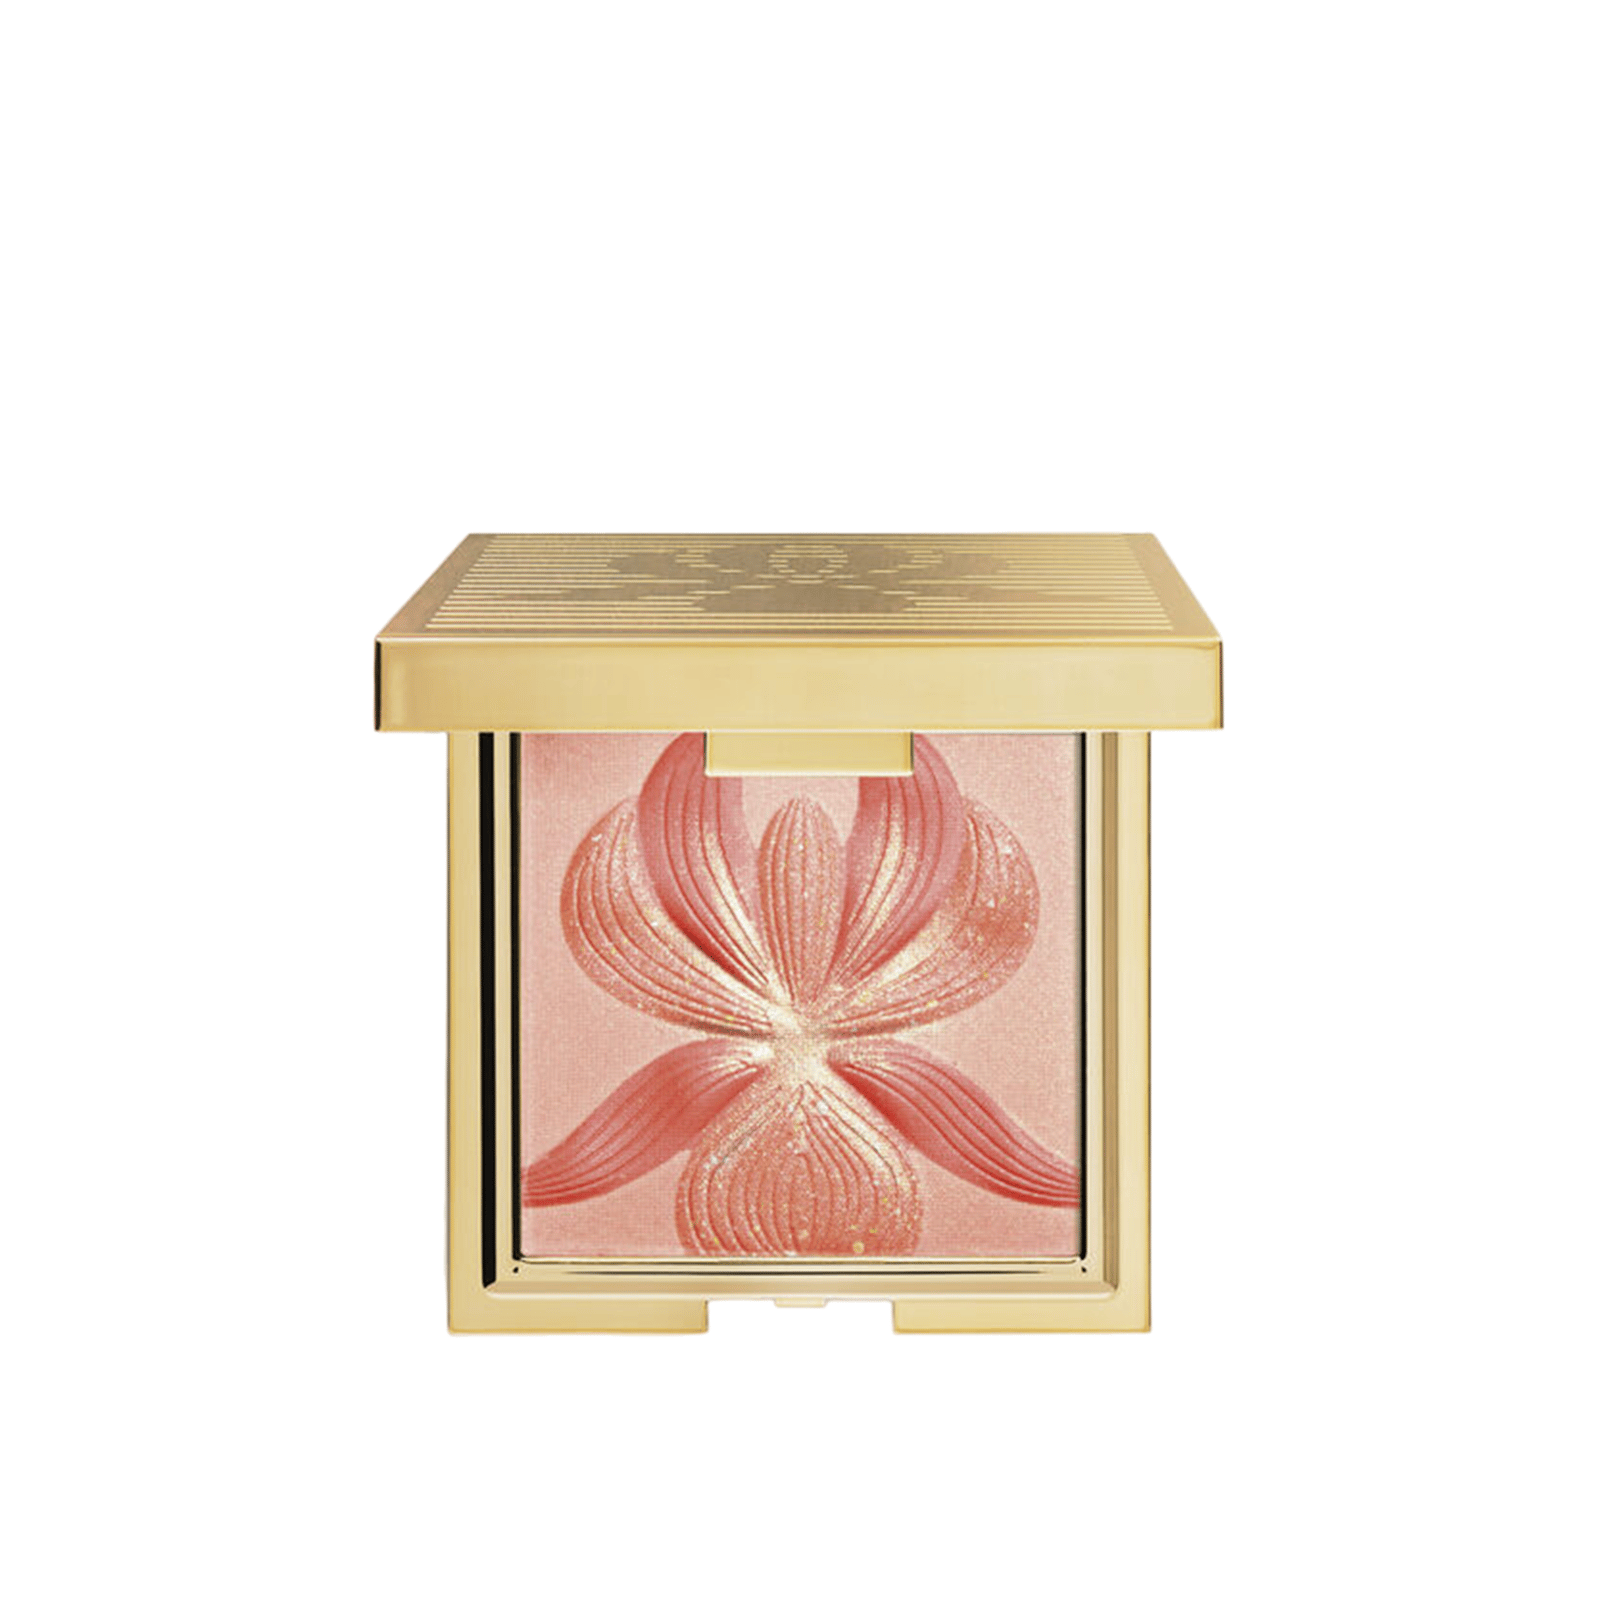 Sisley Paris Highlighter Blush With White Lily L'Orchidée Corail 15g (0.52 oz)